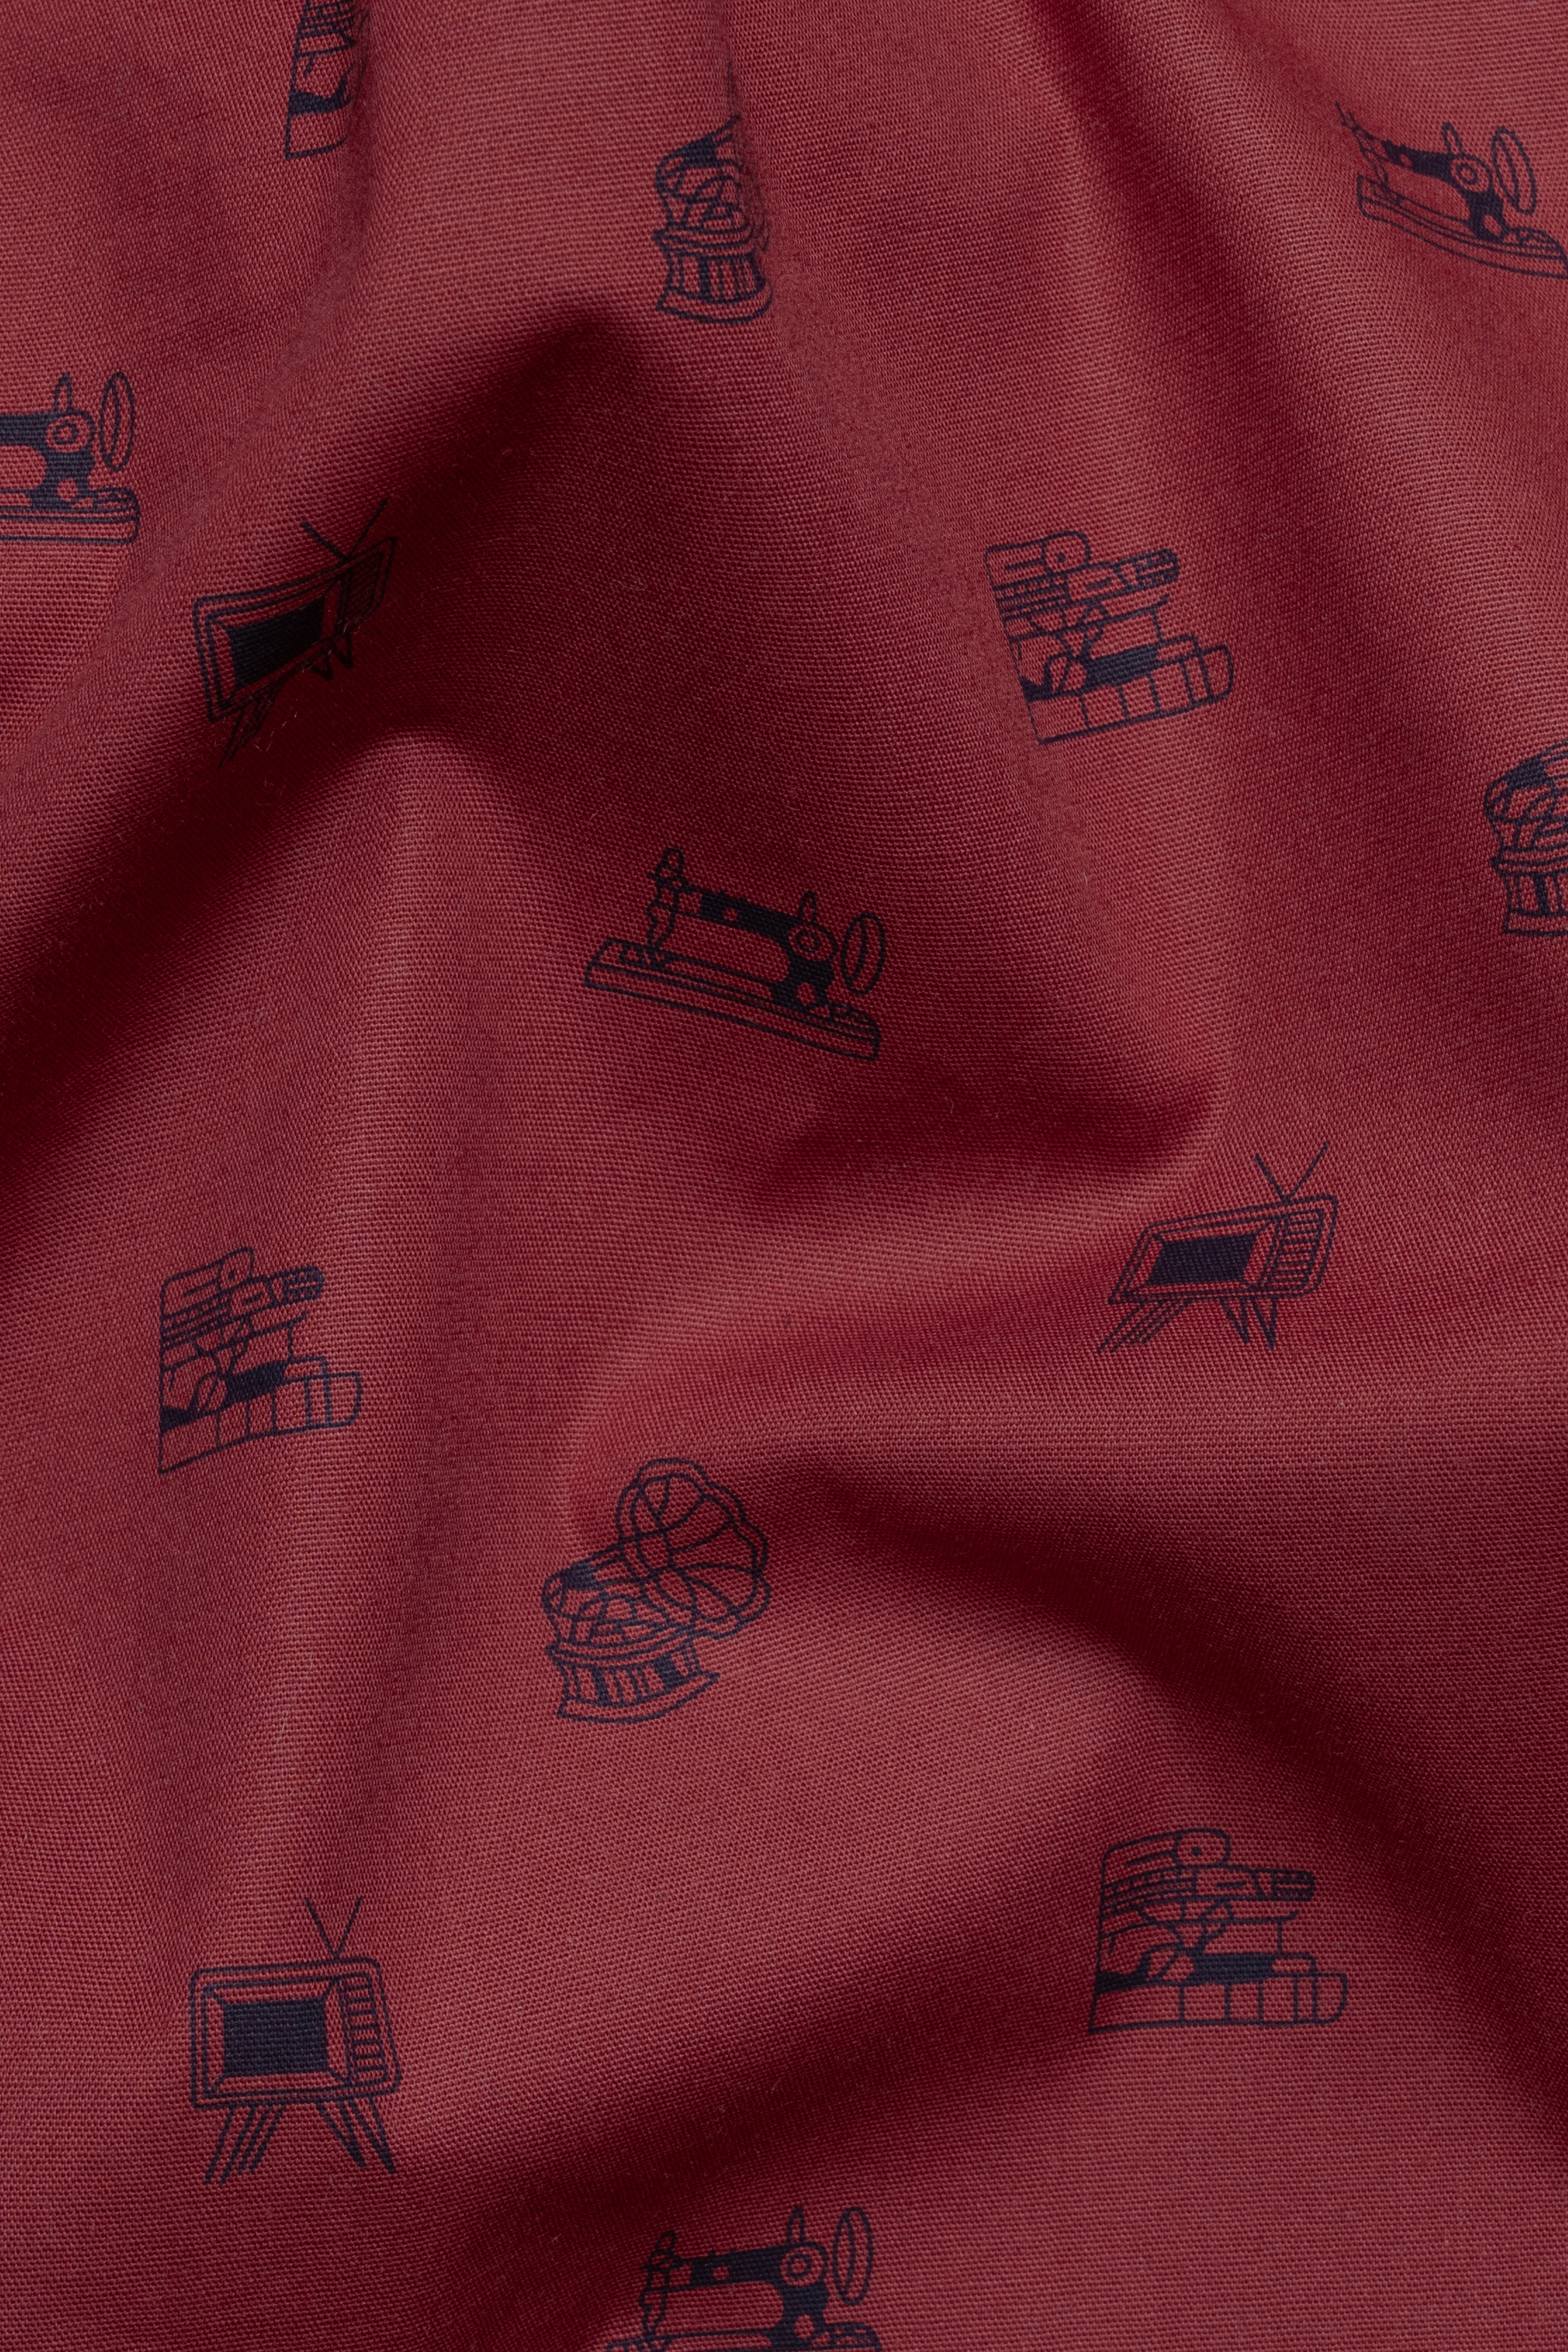 Tawny Port Brown Sewing Machine and Television Printed Super Soft Premium Cotton Shirt